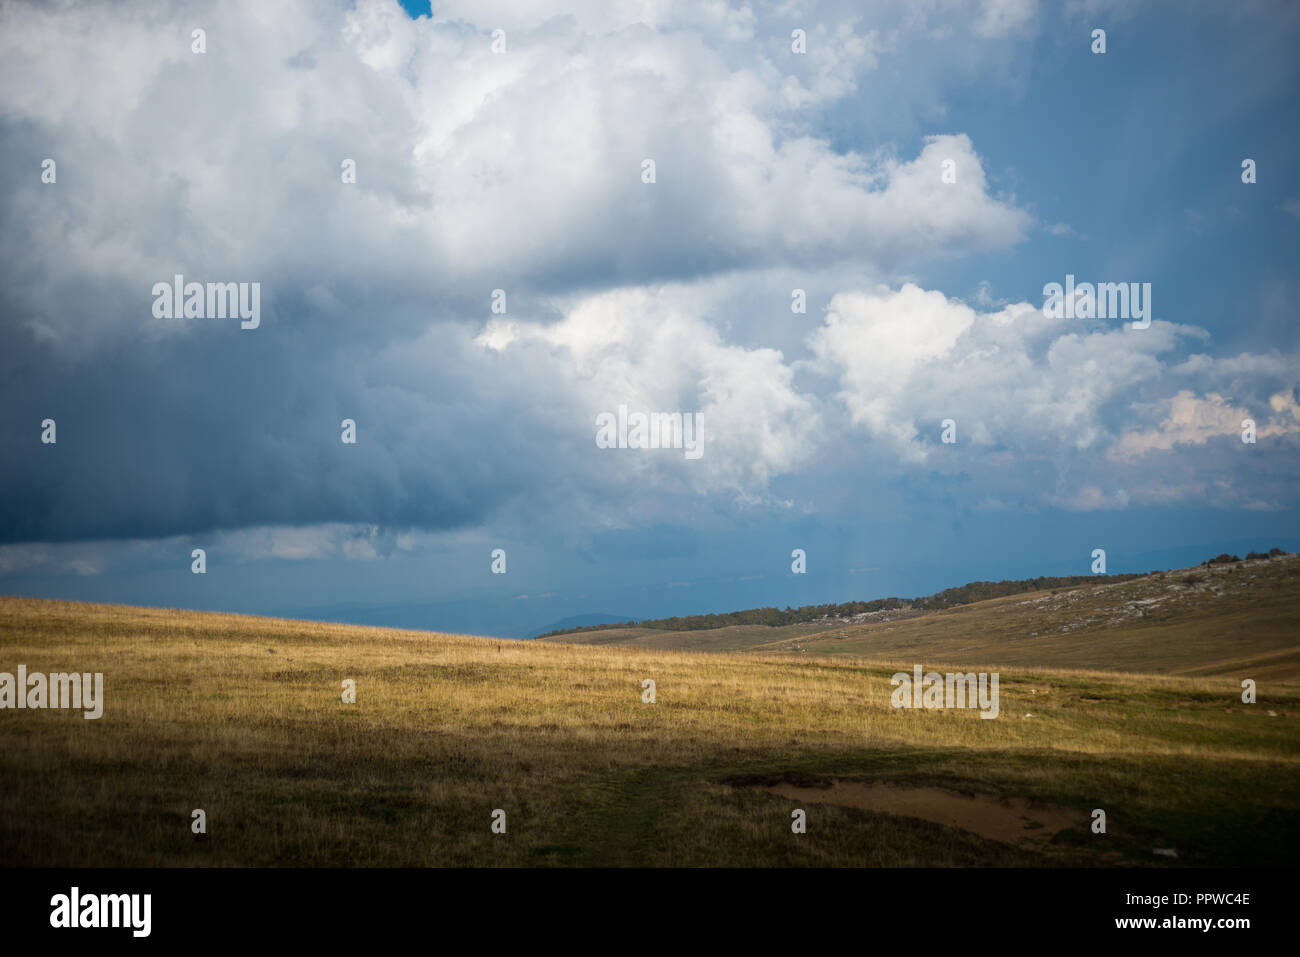 Dark stormy clouds over field Stock Photo